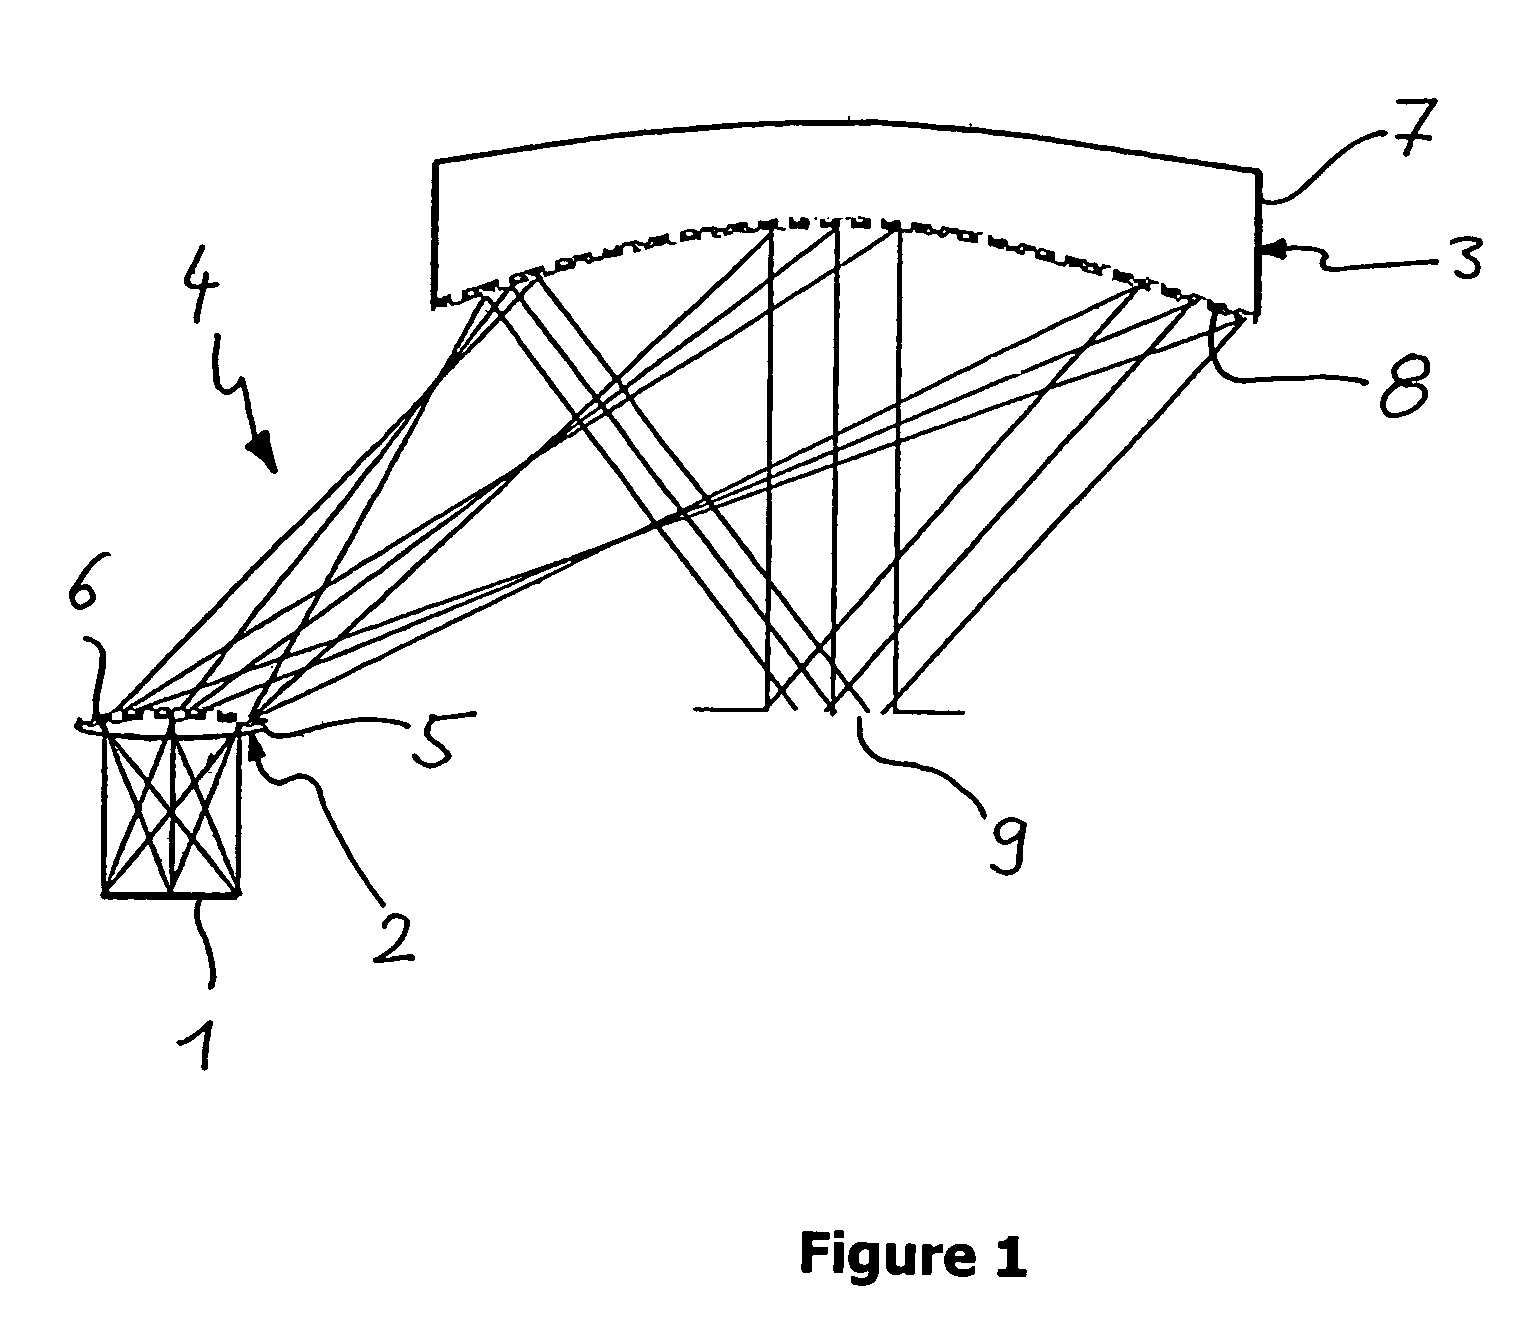 Compensating head mounted display device